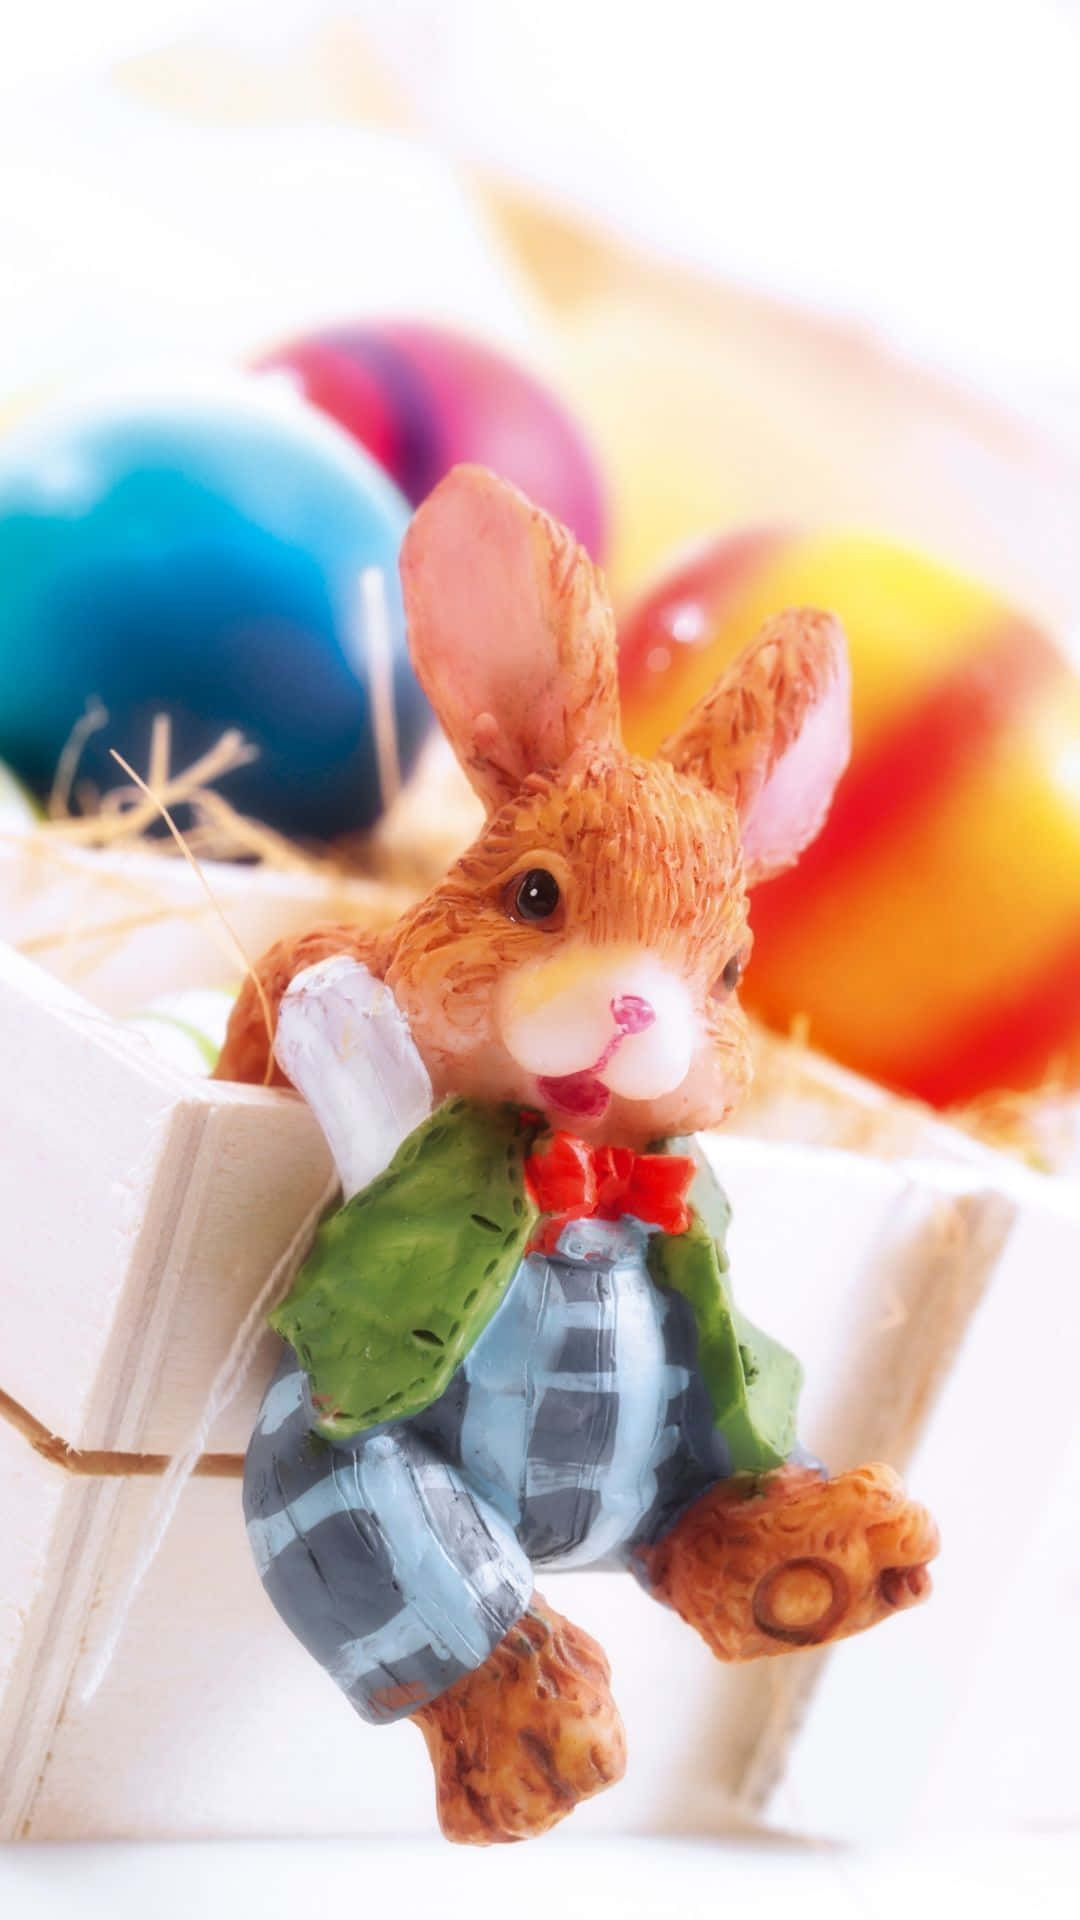 Caption: Delightful Easter Bunny With Colorful Eggs Background